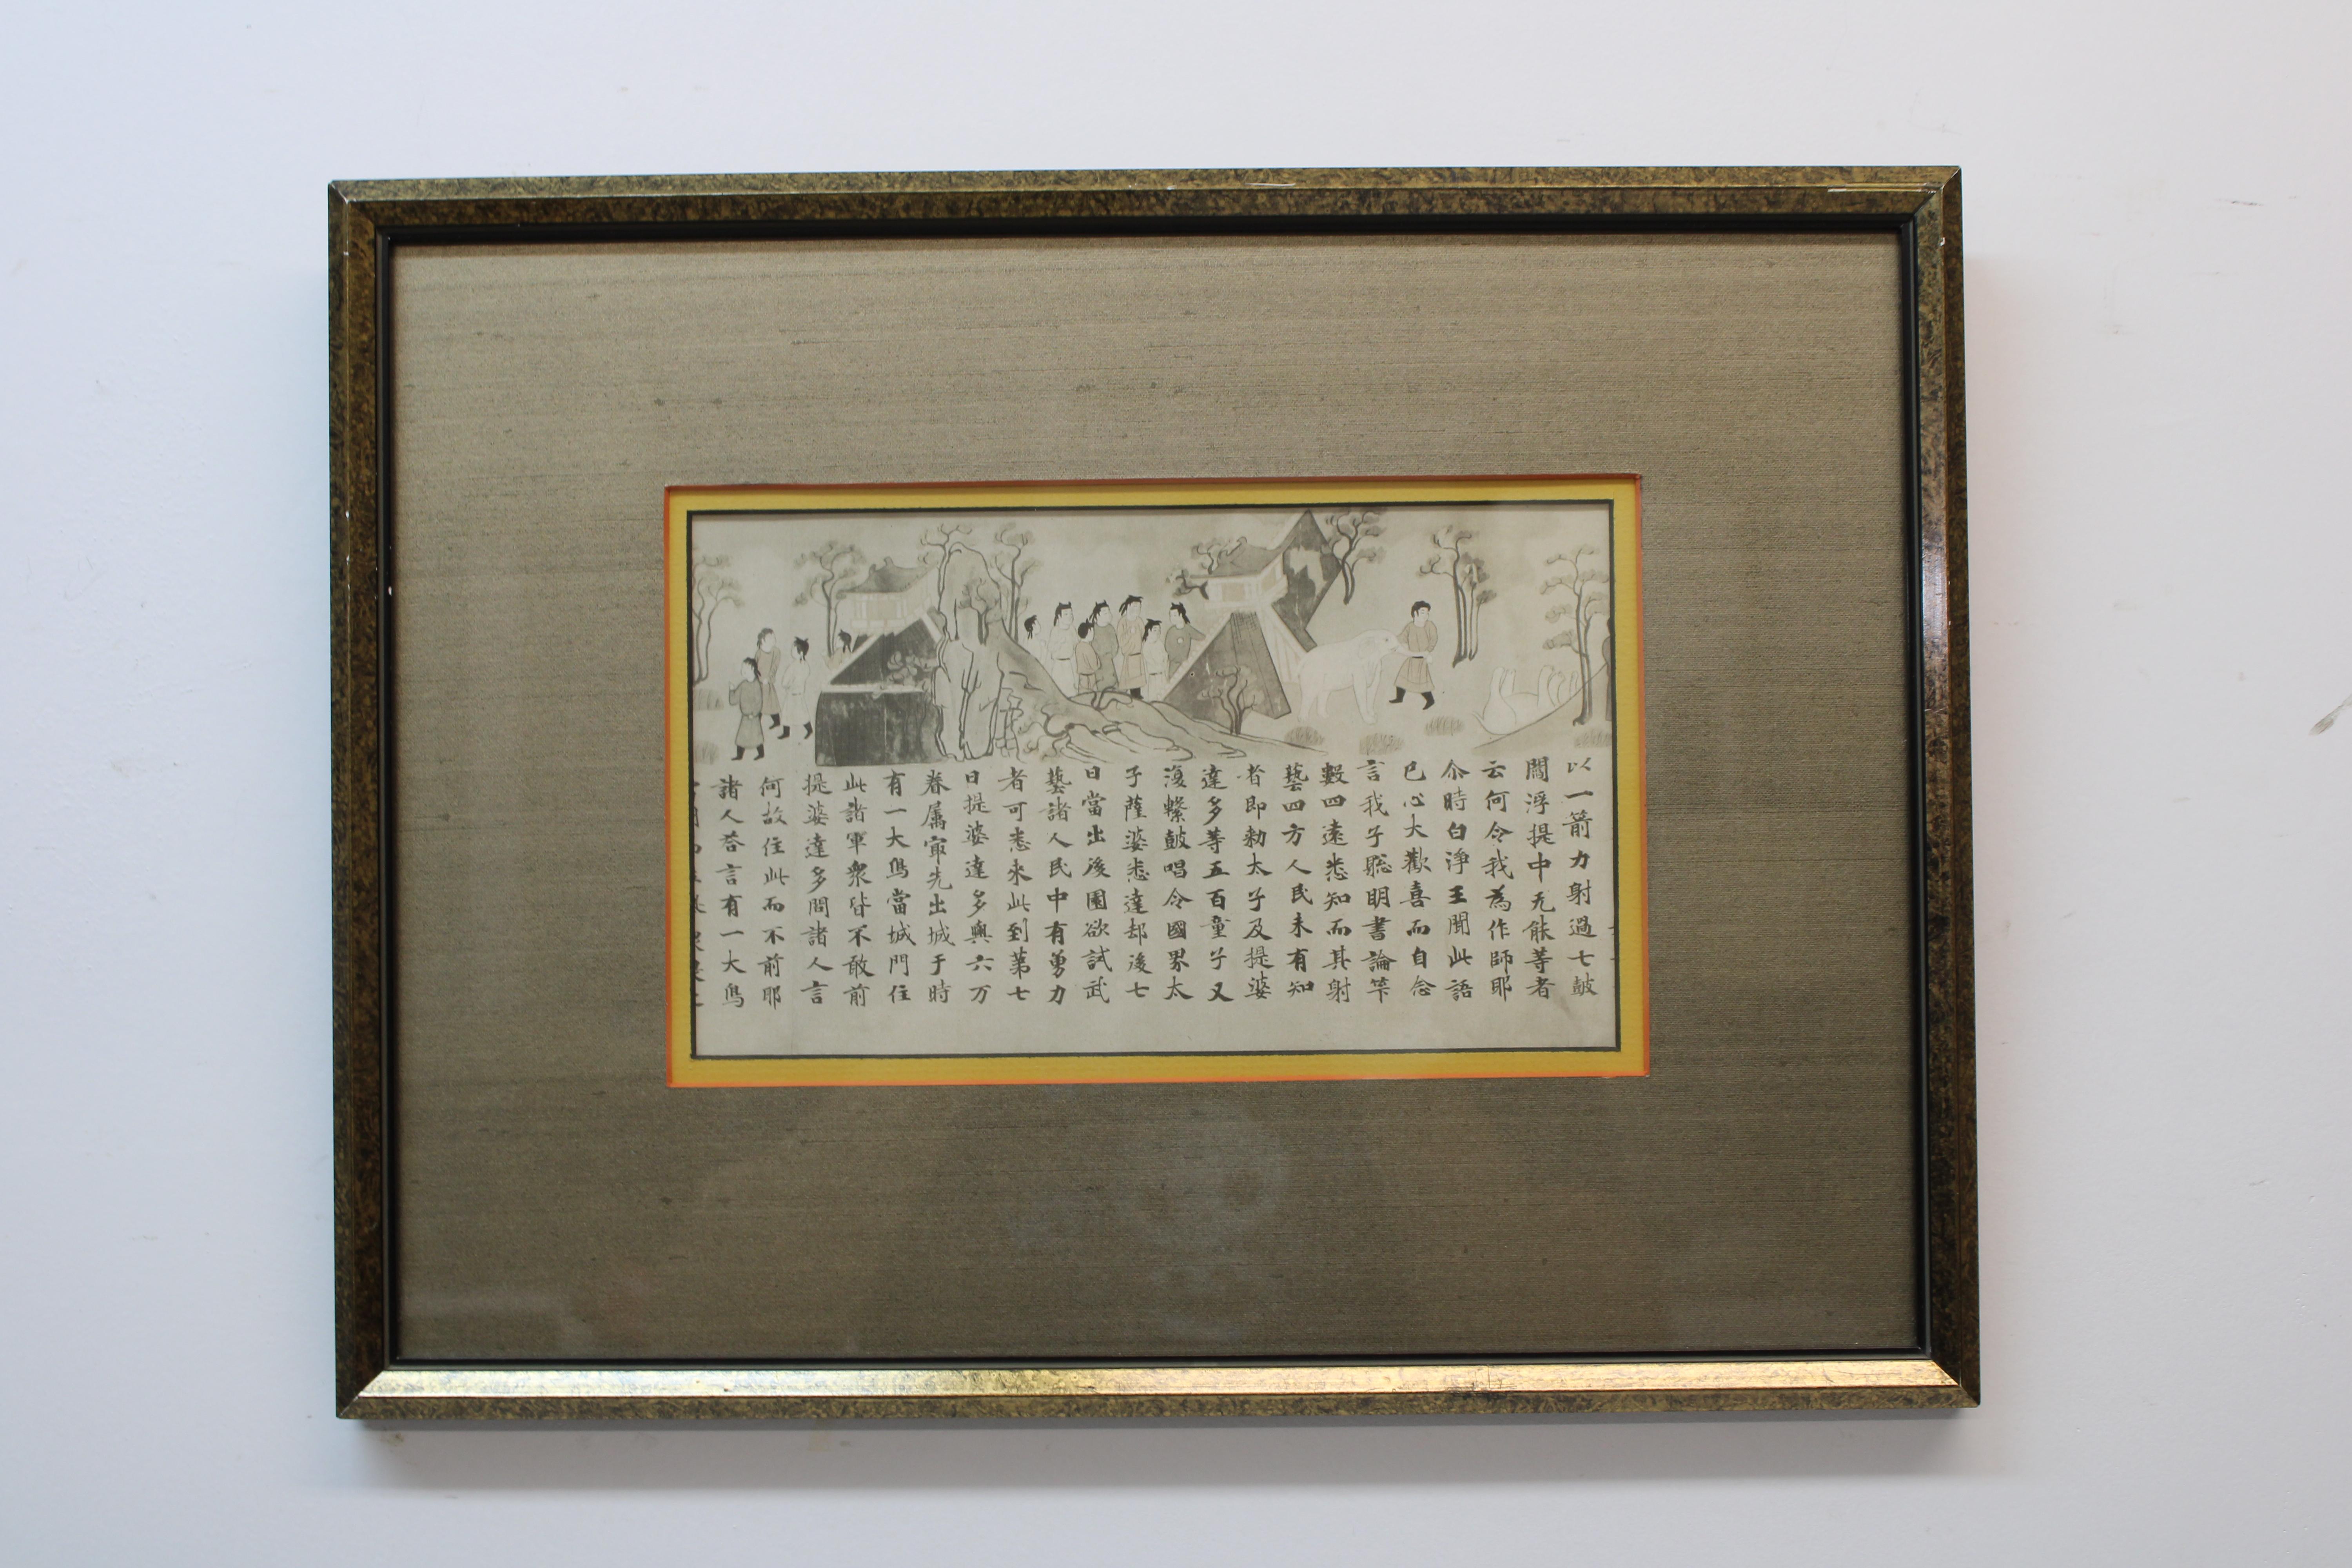 Unknown Figurative Painting - Framed Chinese Pictorial Poem " Man Assisting Animals "